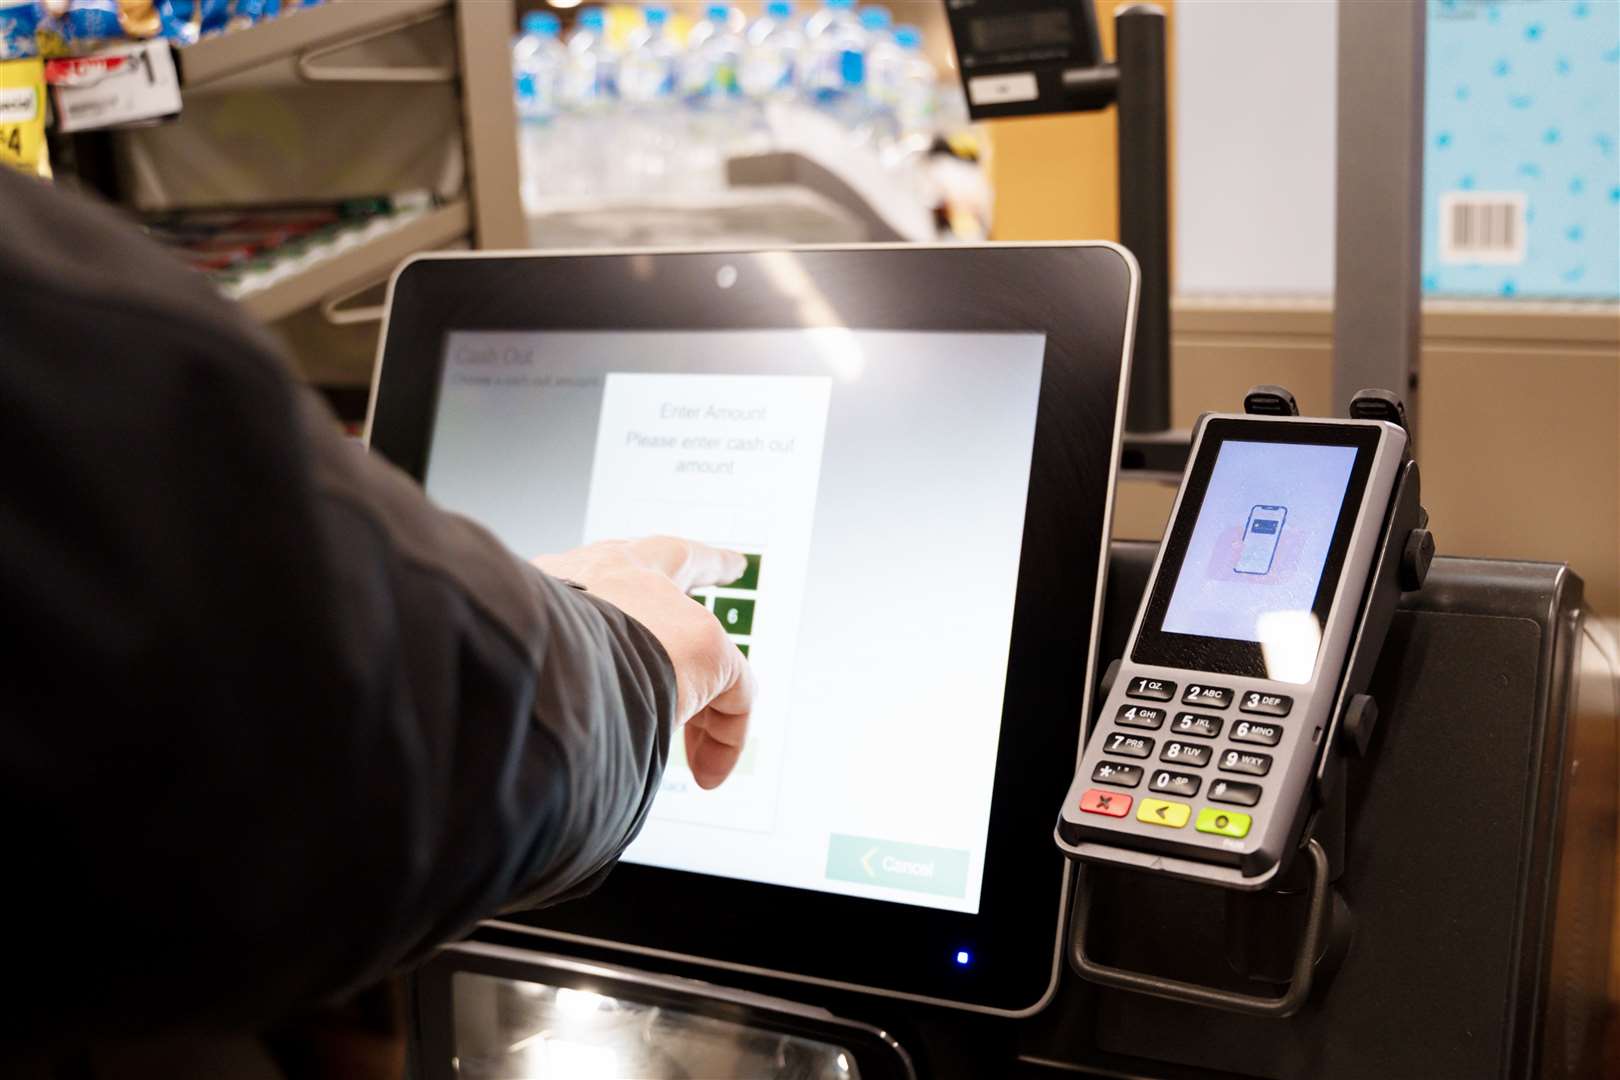 Self service checkouts are now commonplace. Image: iStock.